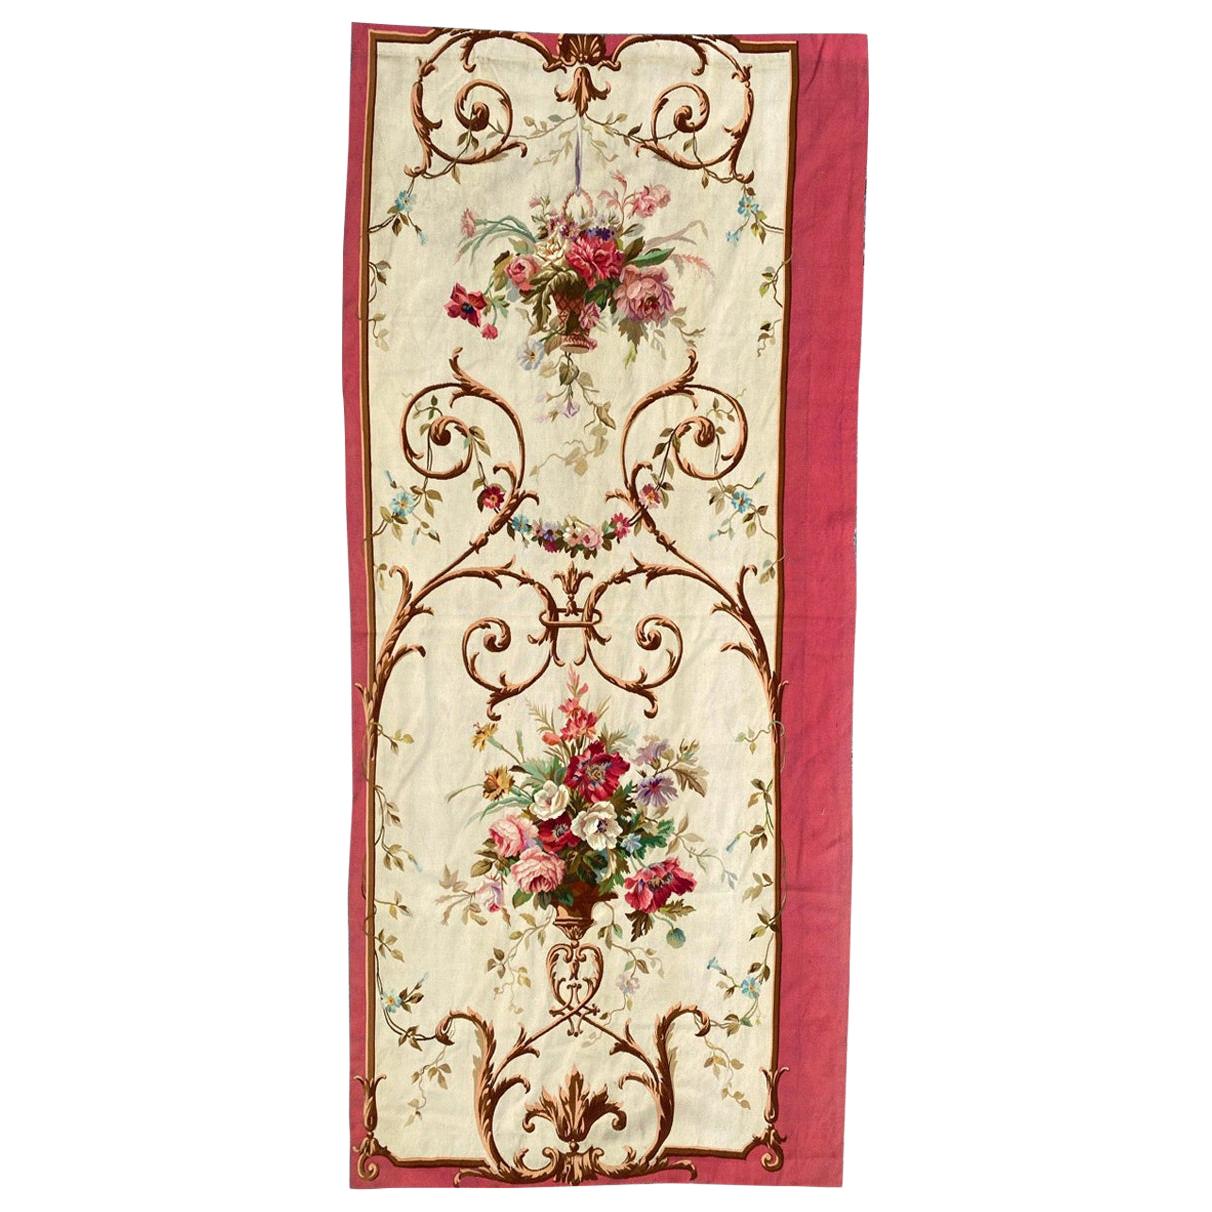 Bobyrug’s Nice Antique French Aubusson Tapestry Panel